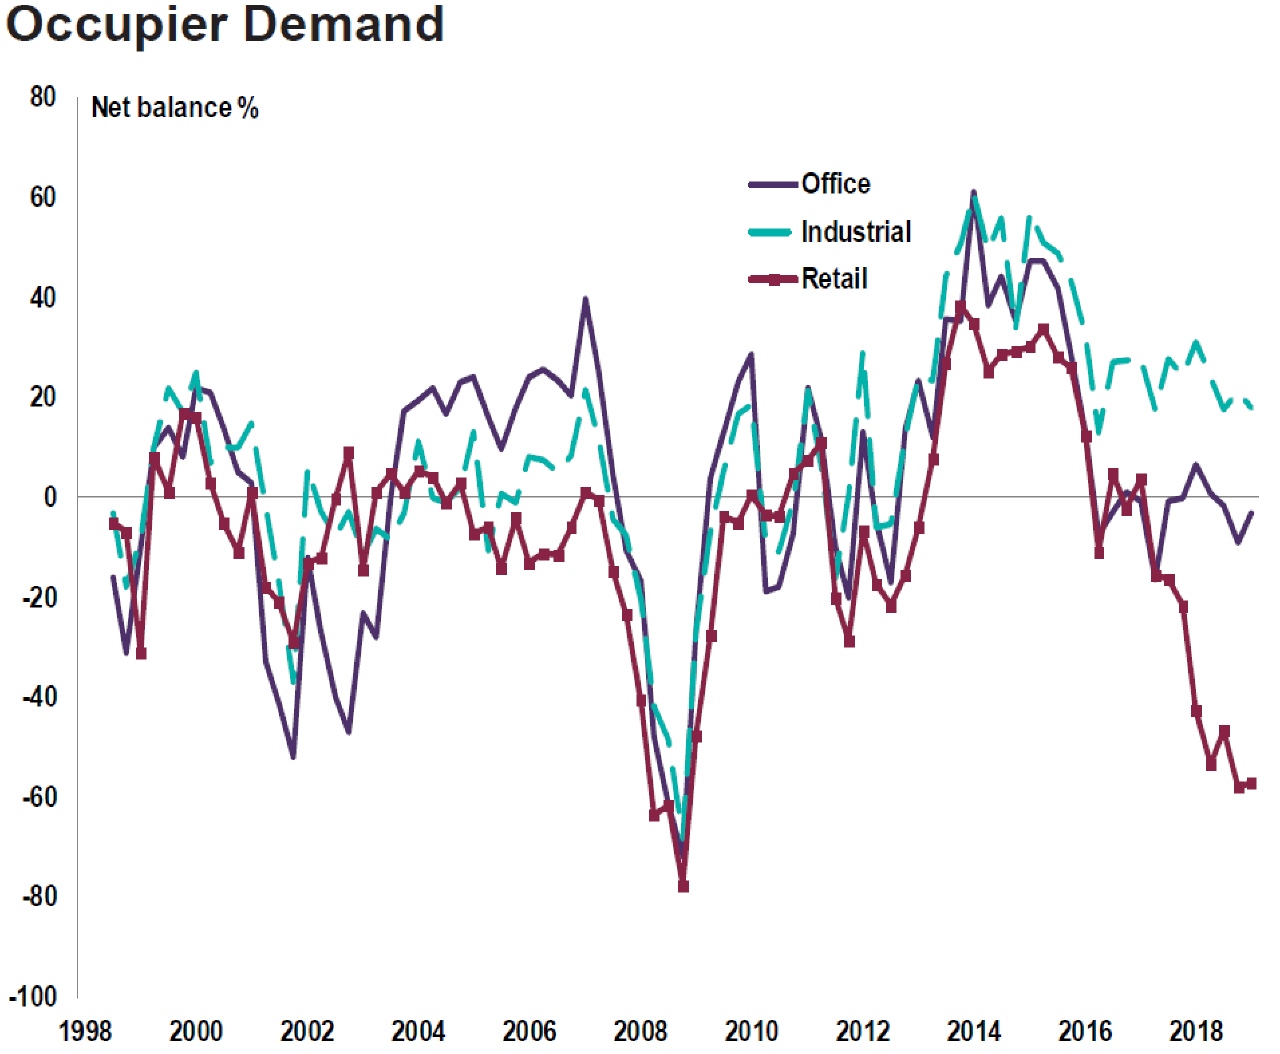 Industrials still in huge demand as retail fails to pick up